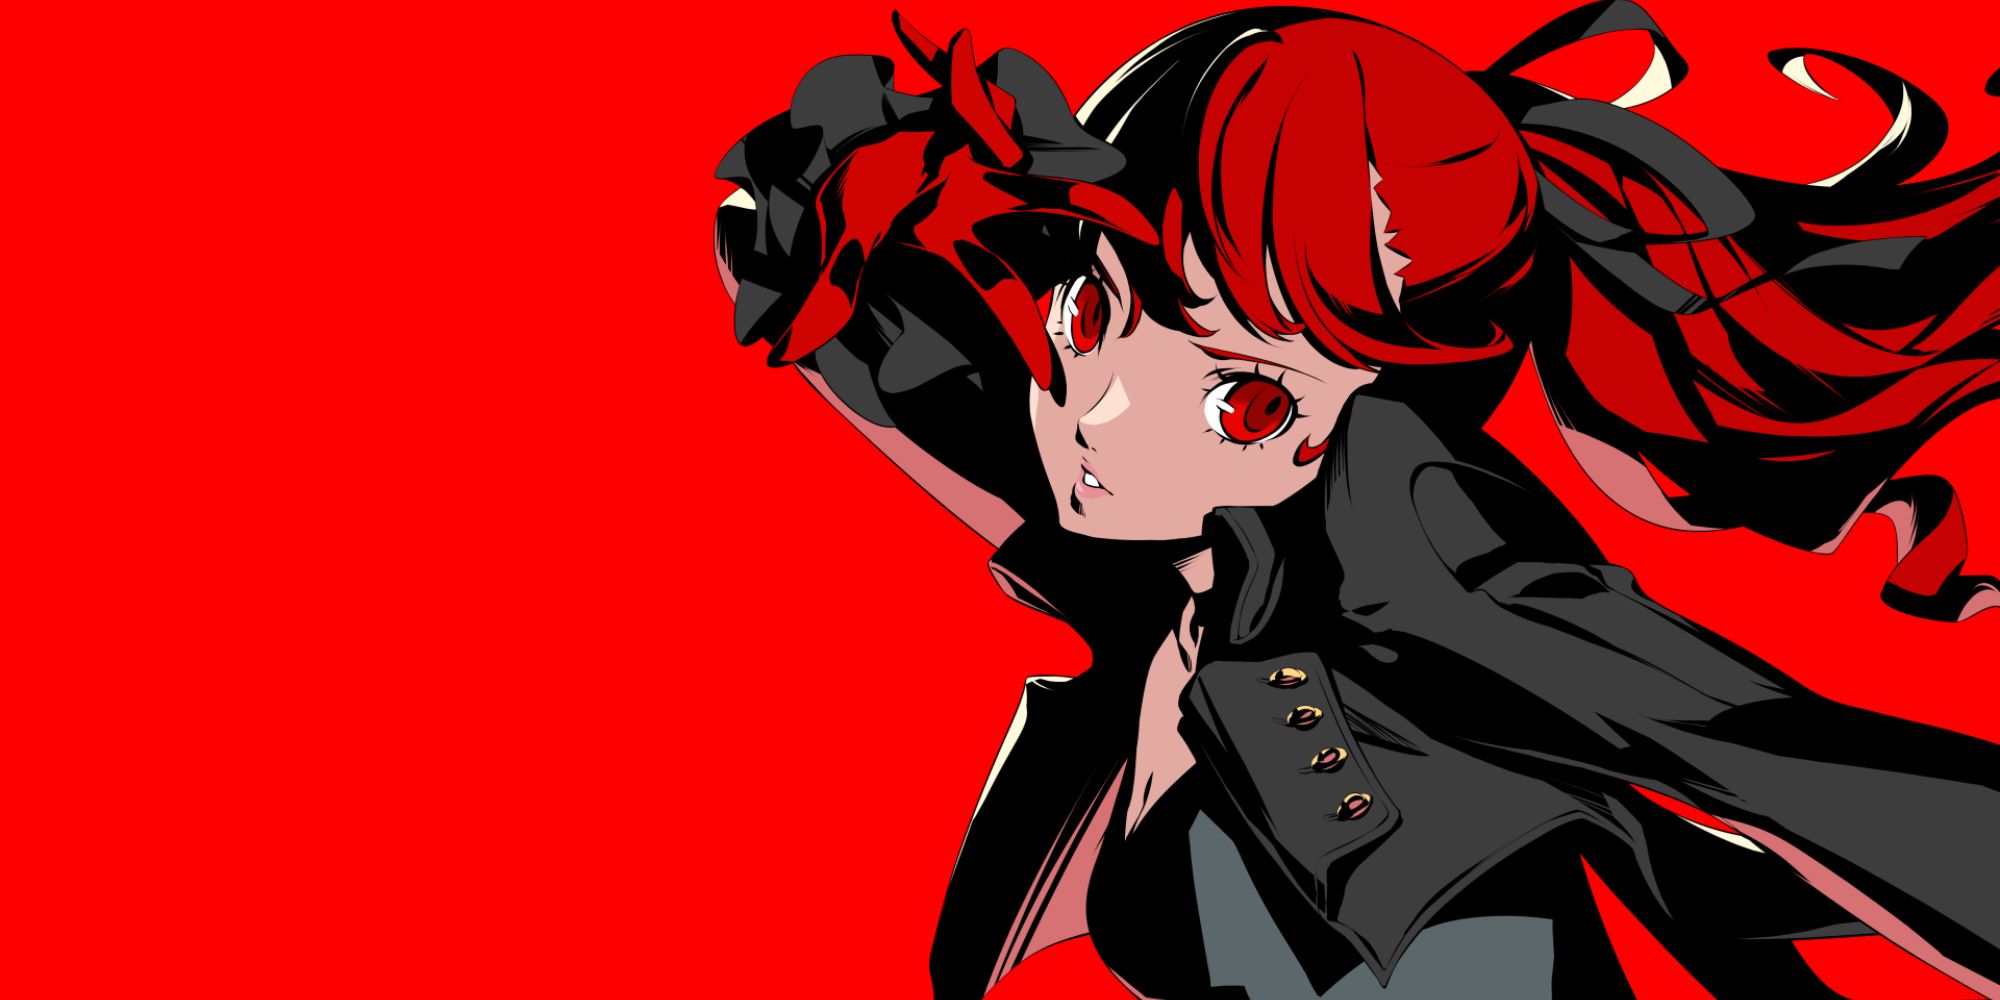 a character portrait of Sumire Yoshizawa from Persona 5 Royal against a red background